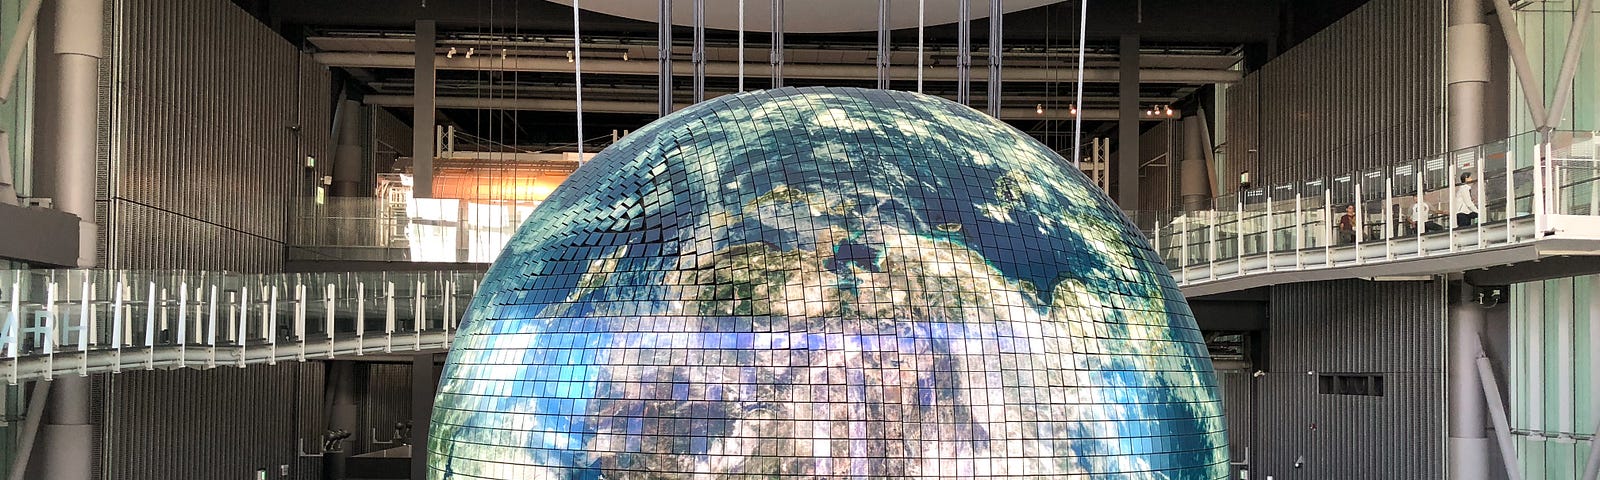 A globe hangs in an exhibition space.